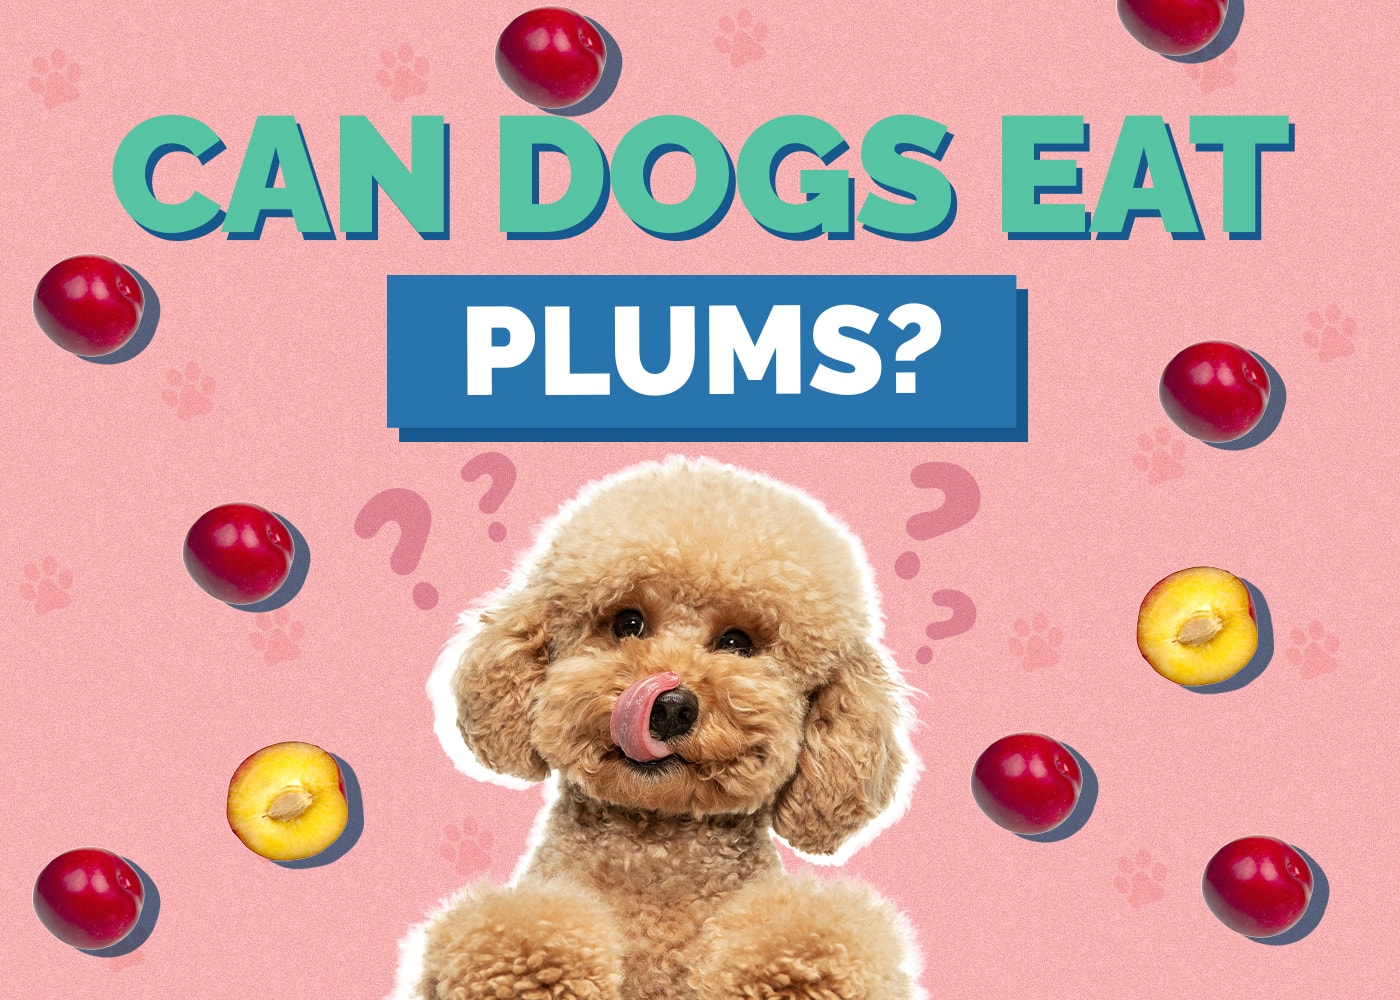 Can Dogs Eat plums